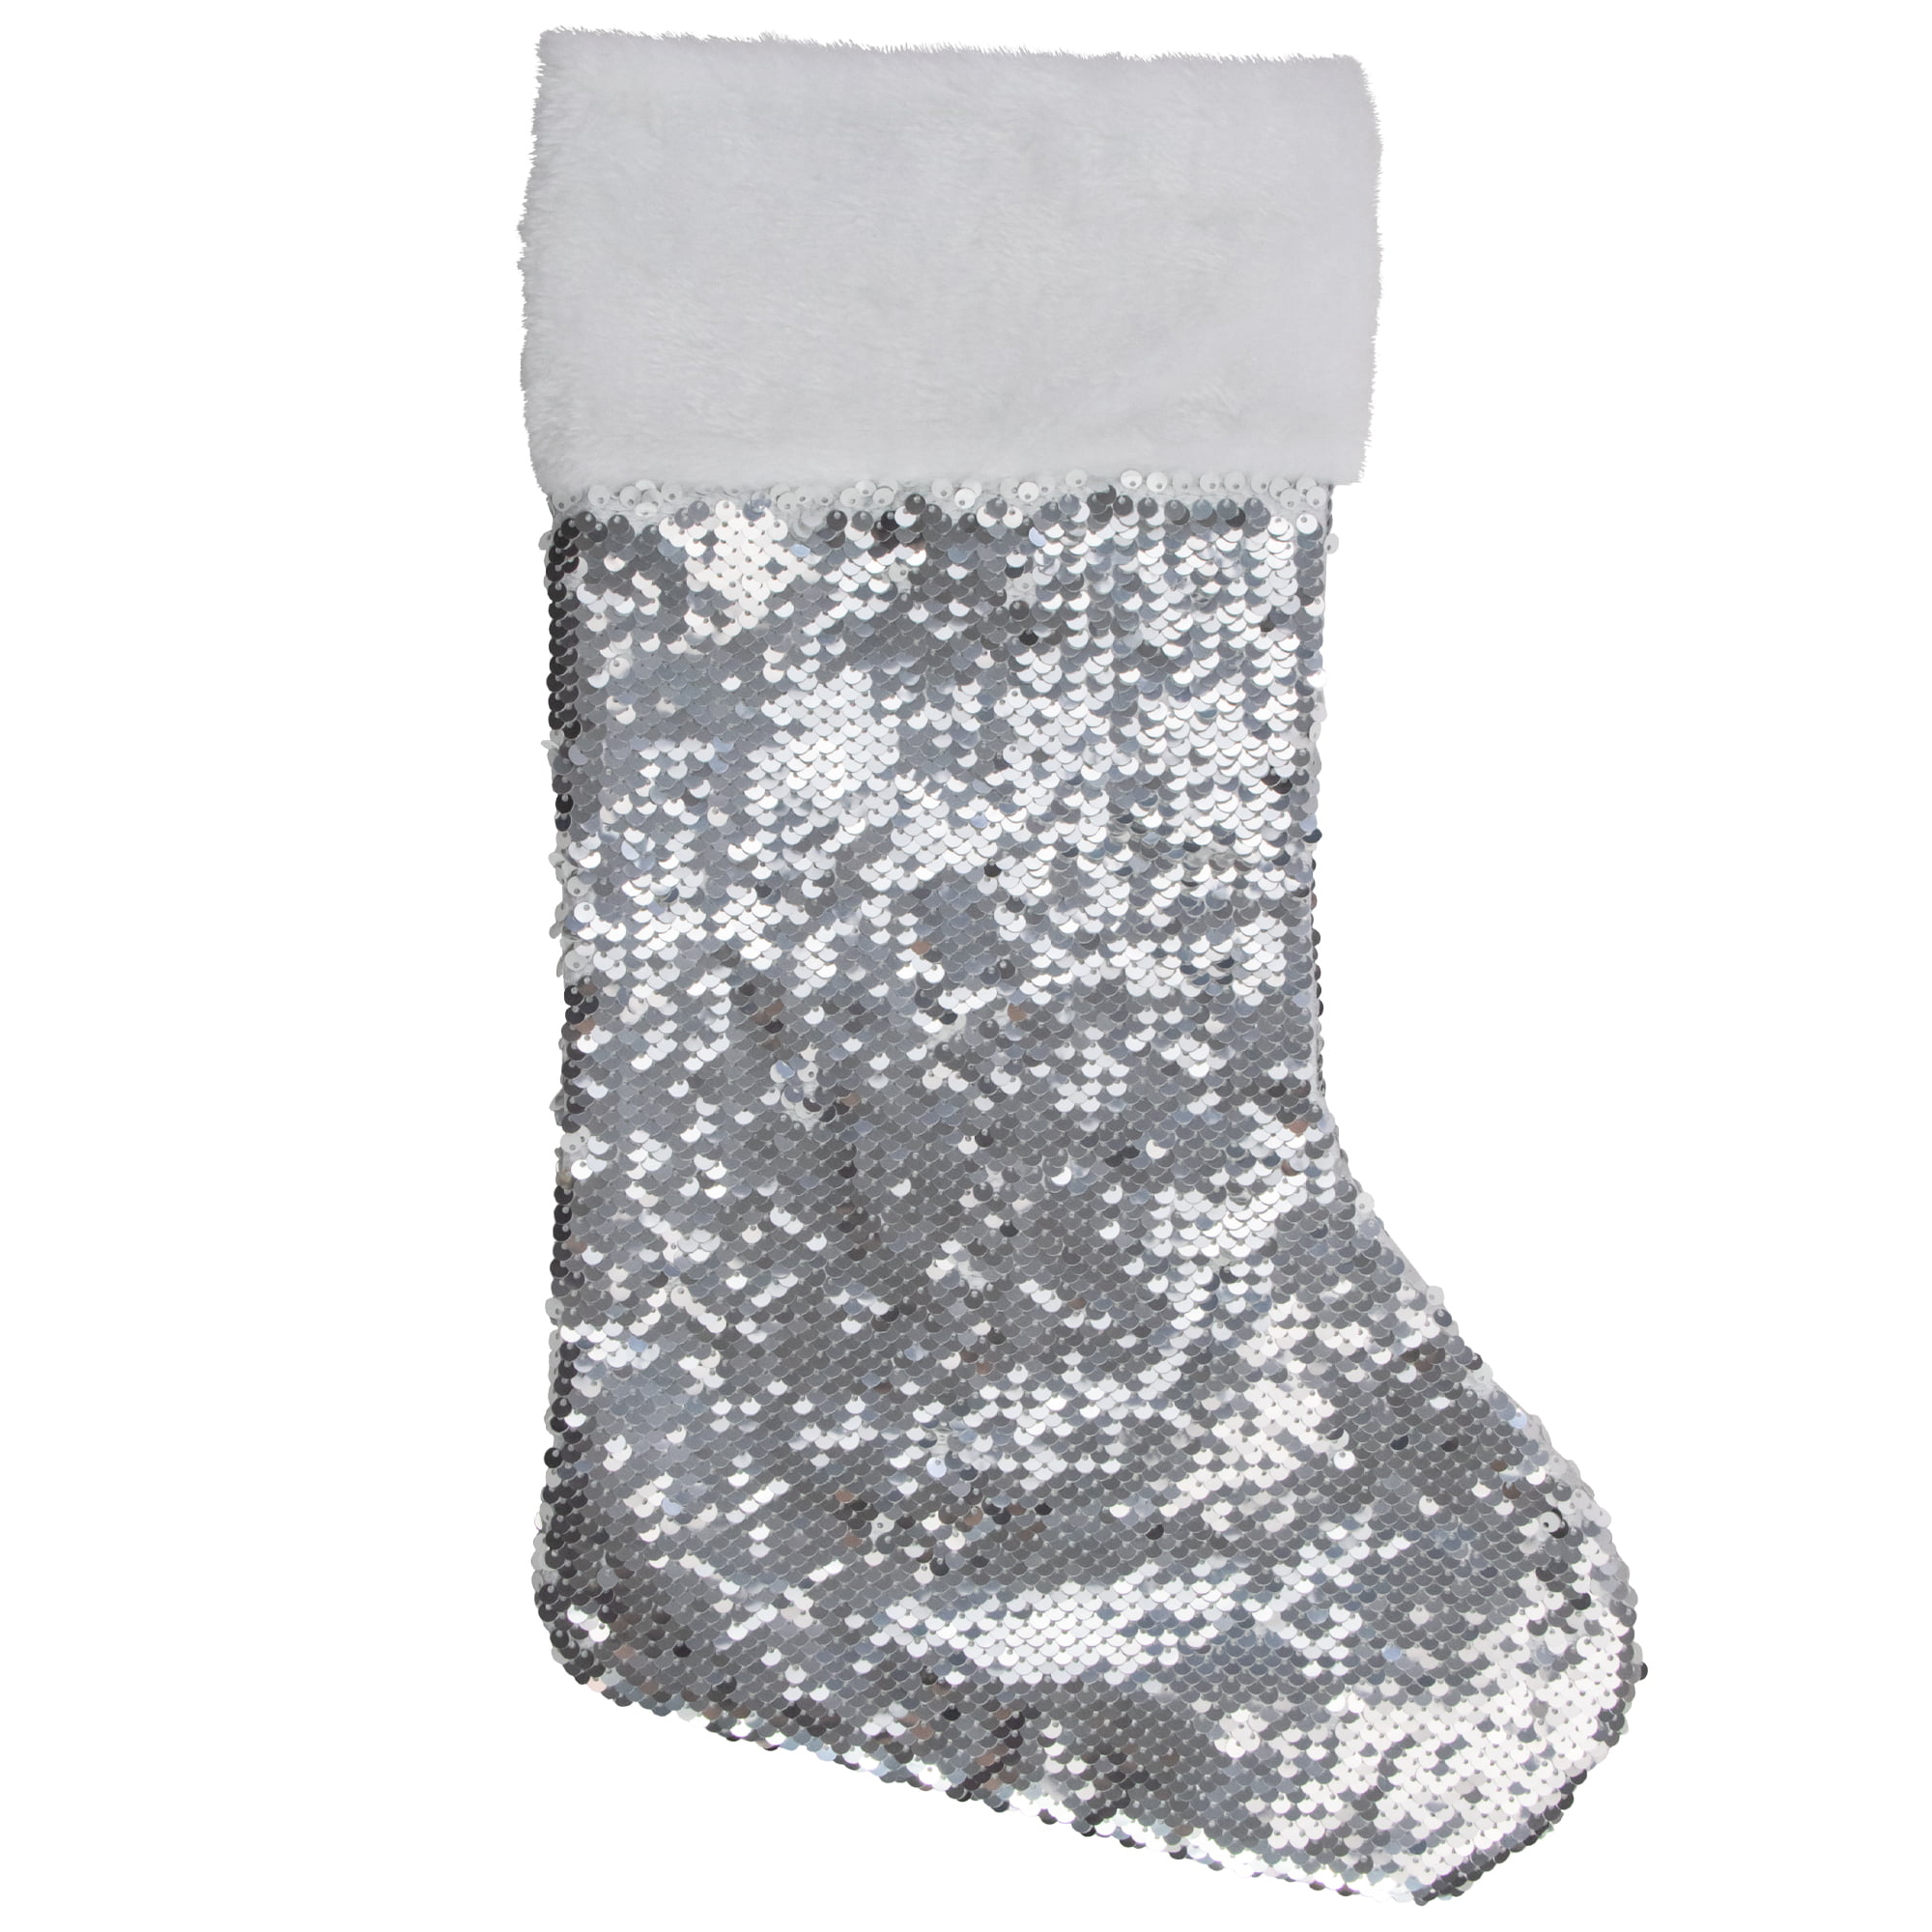 White Christmas Stocking With Silver Sequins 